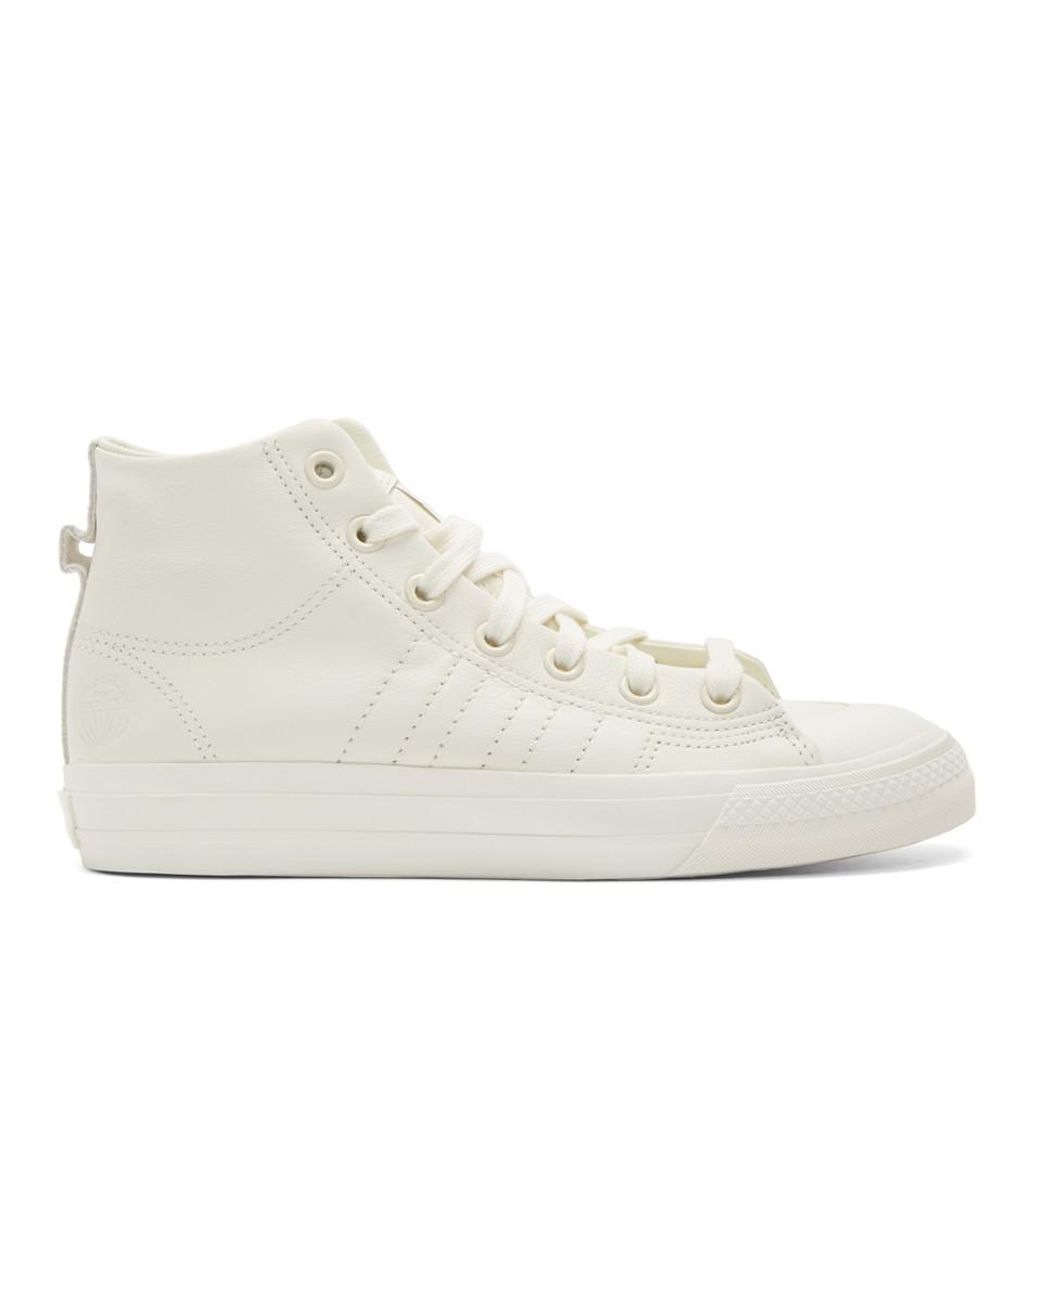 adidas Originals Leather Off-white Nizza Hi Rf Sneakers for Men | Lyst